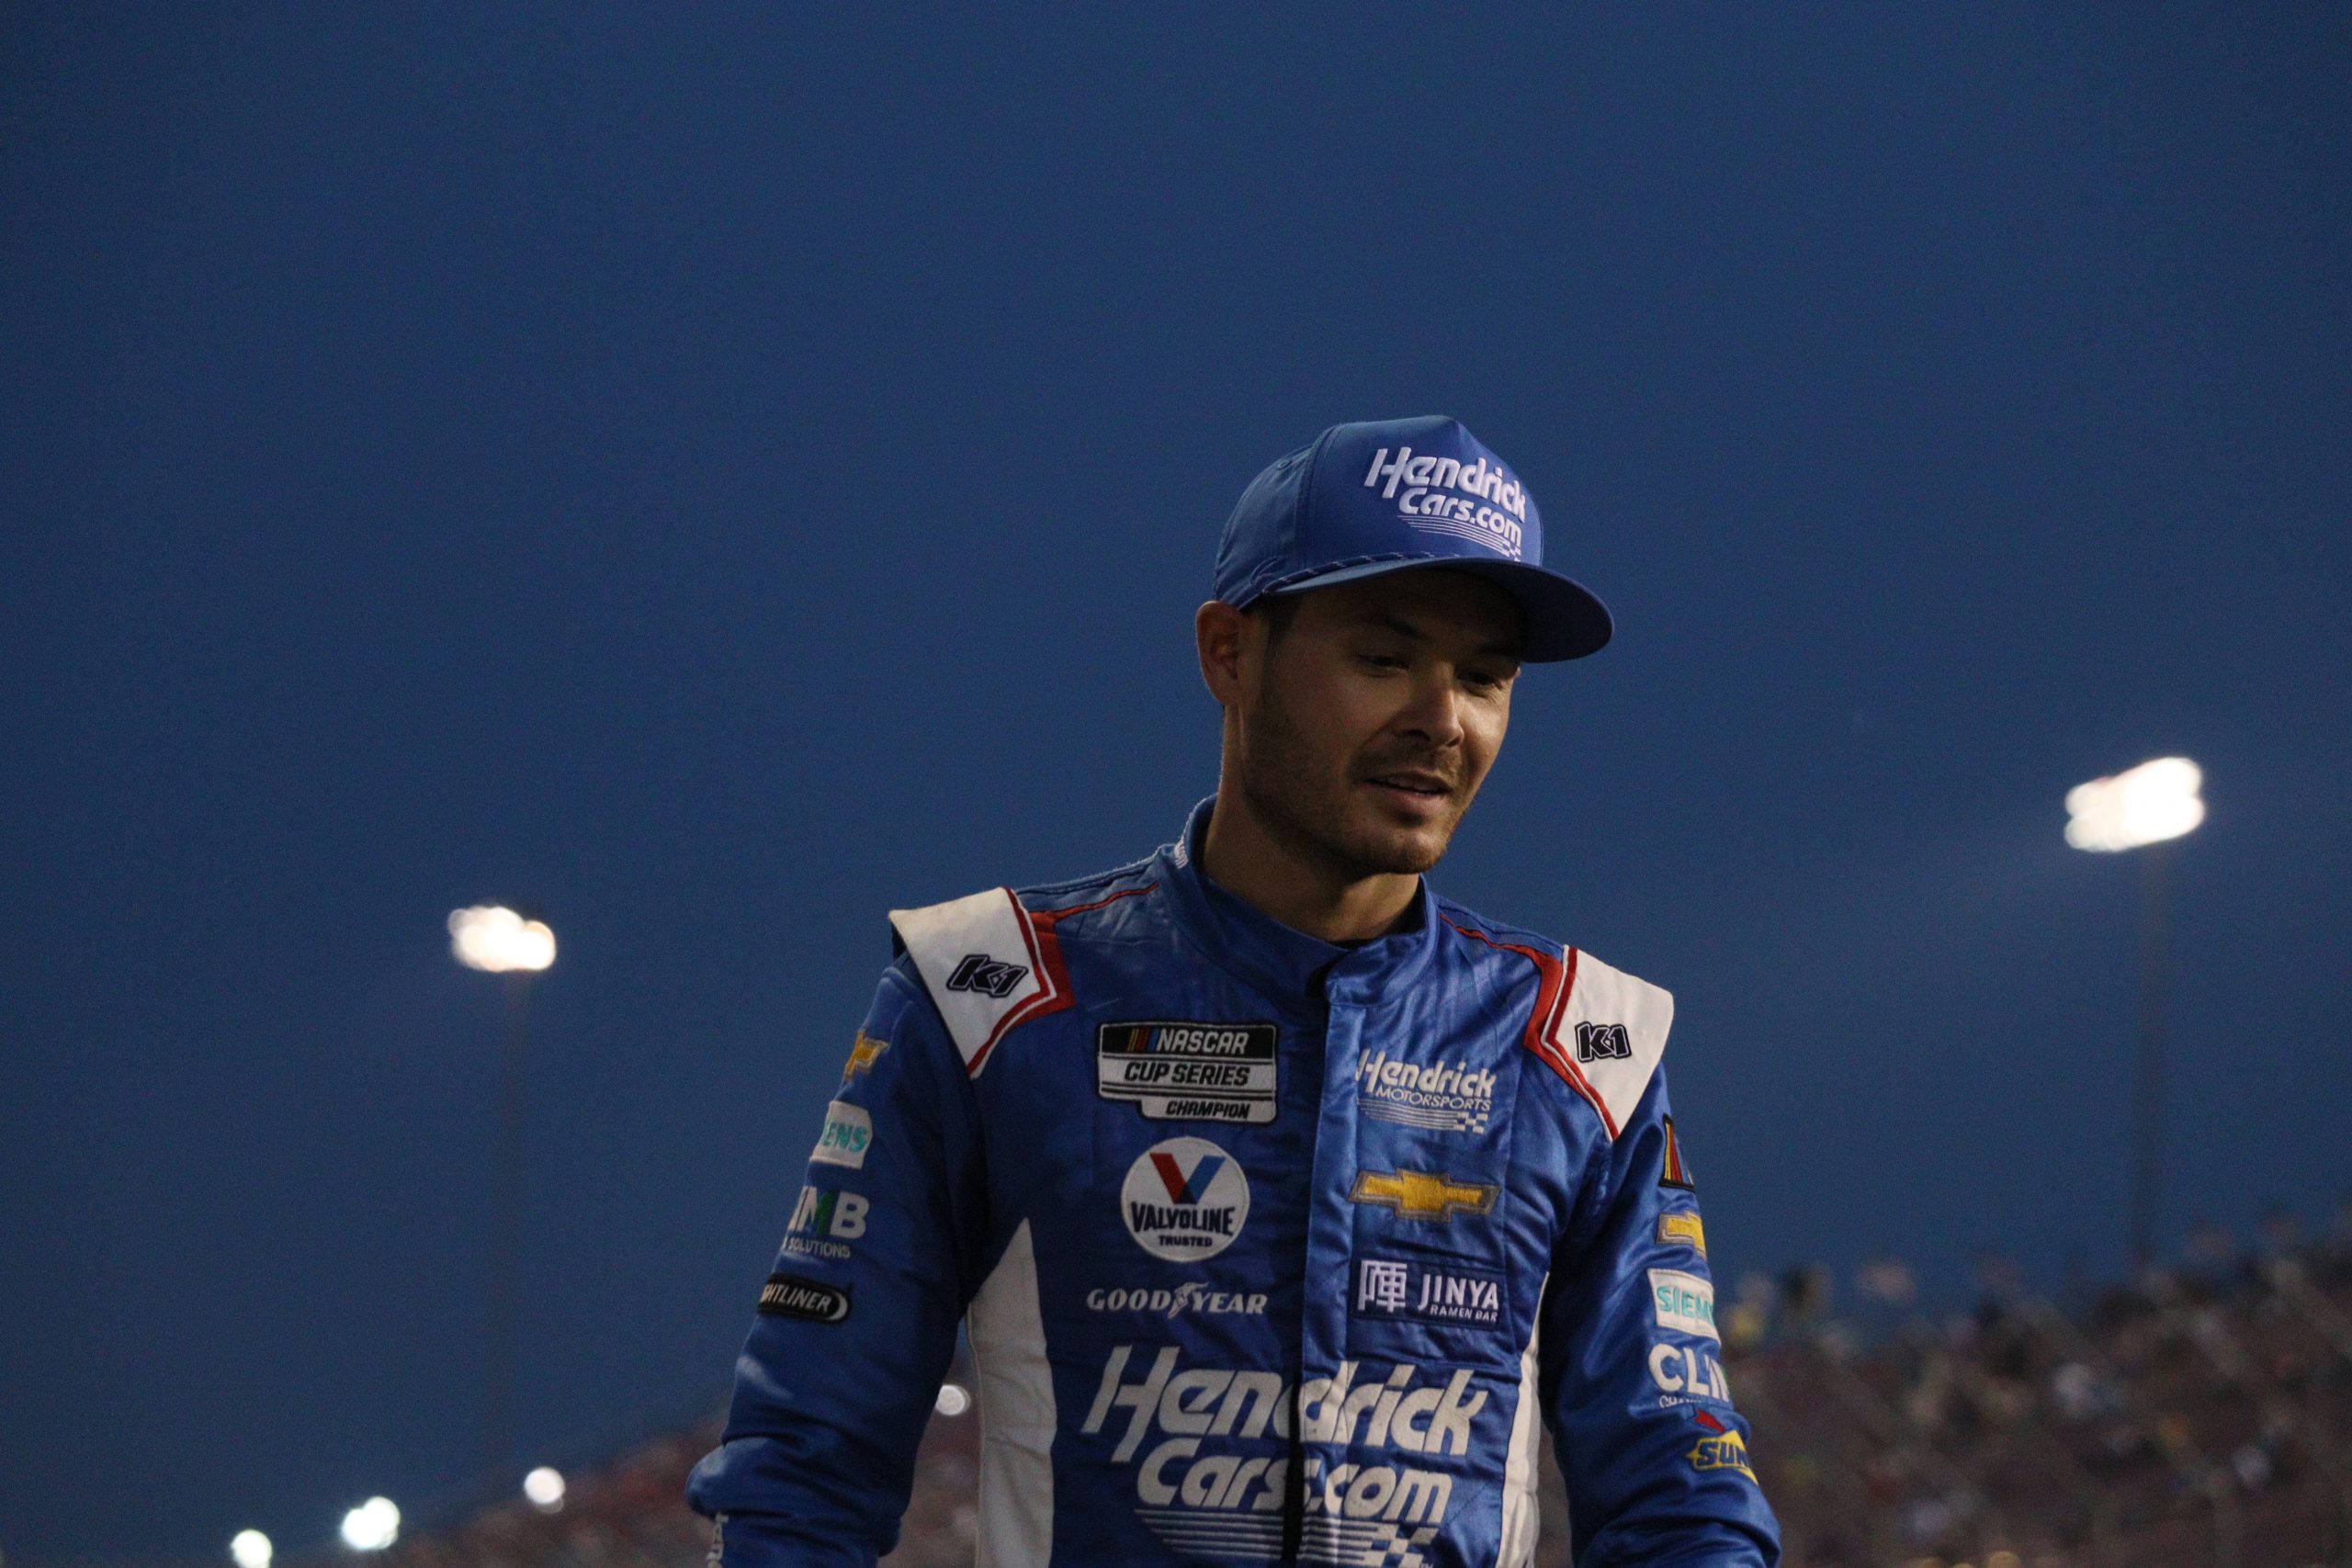 Kyle Larson tallied his first top five result in a points paying race since the AdventHealth 400 at Kansas nearly a month ago. (Photo: Bobby Krug | The Podium Finish)